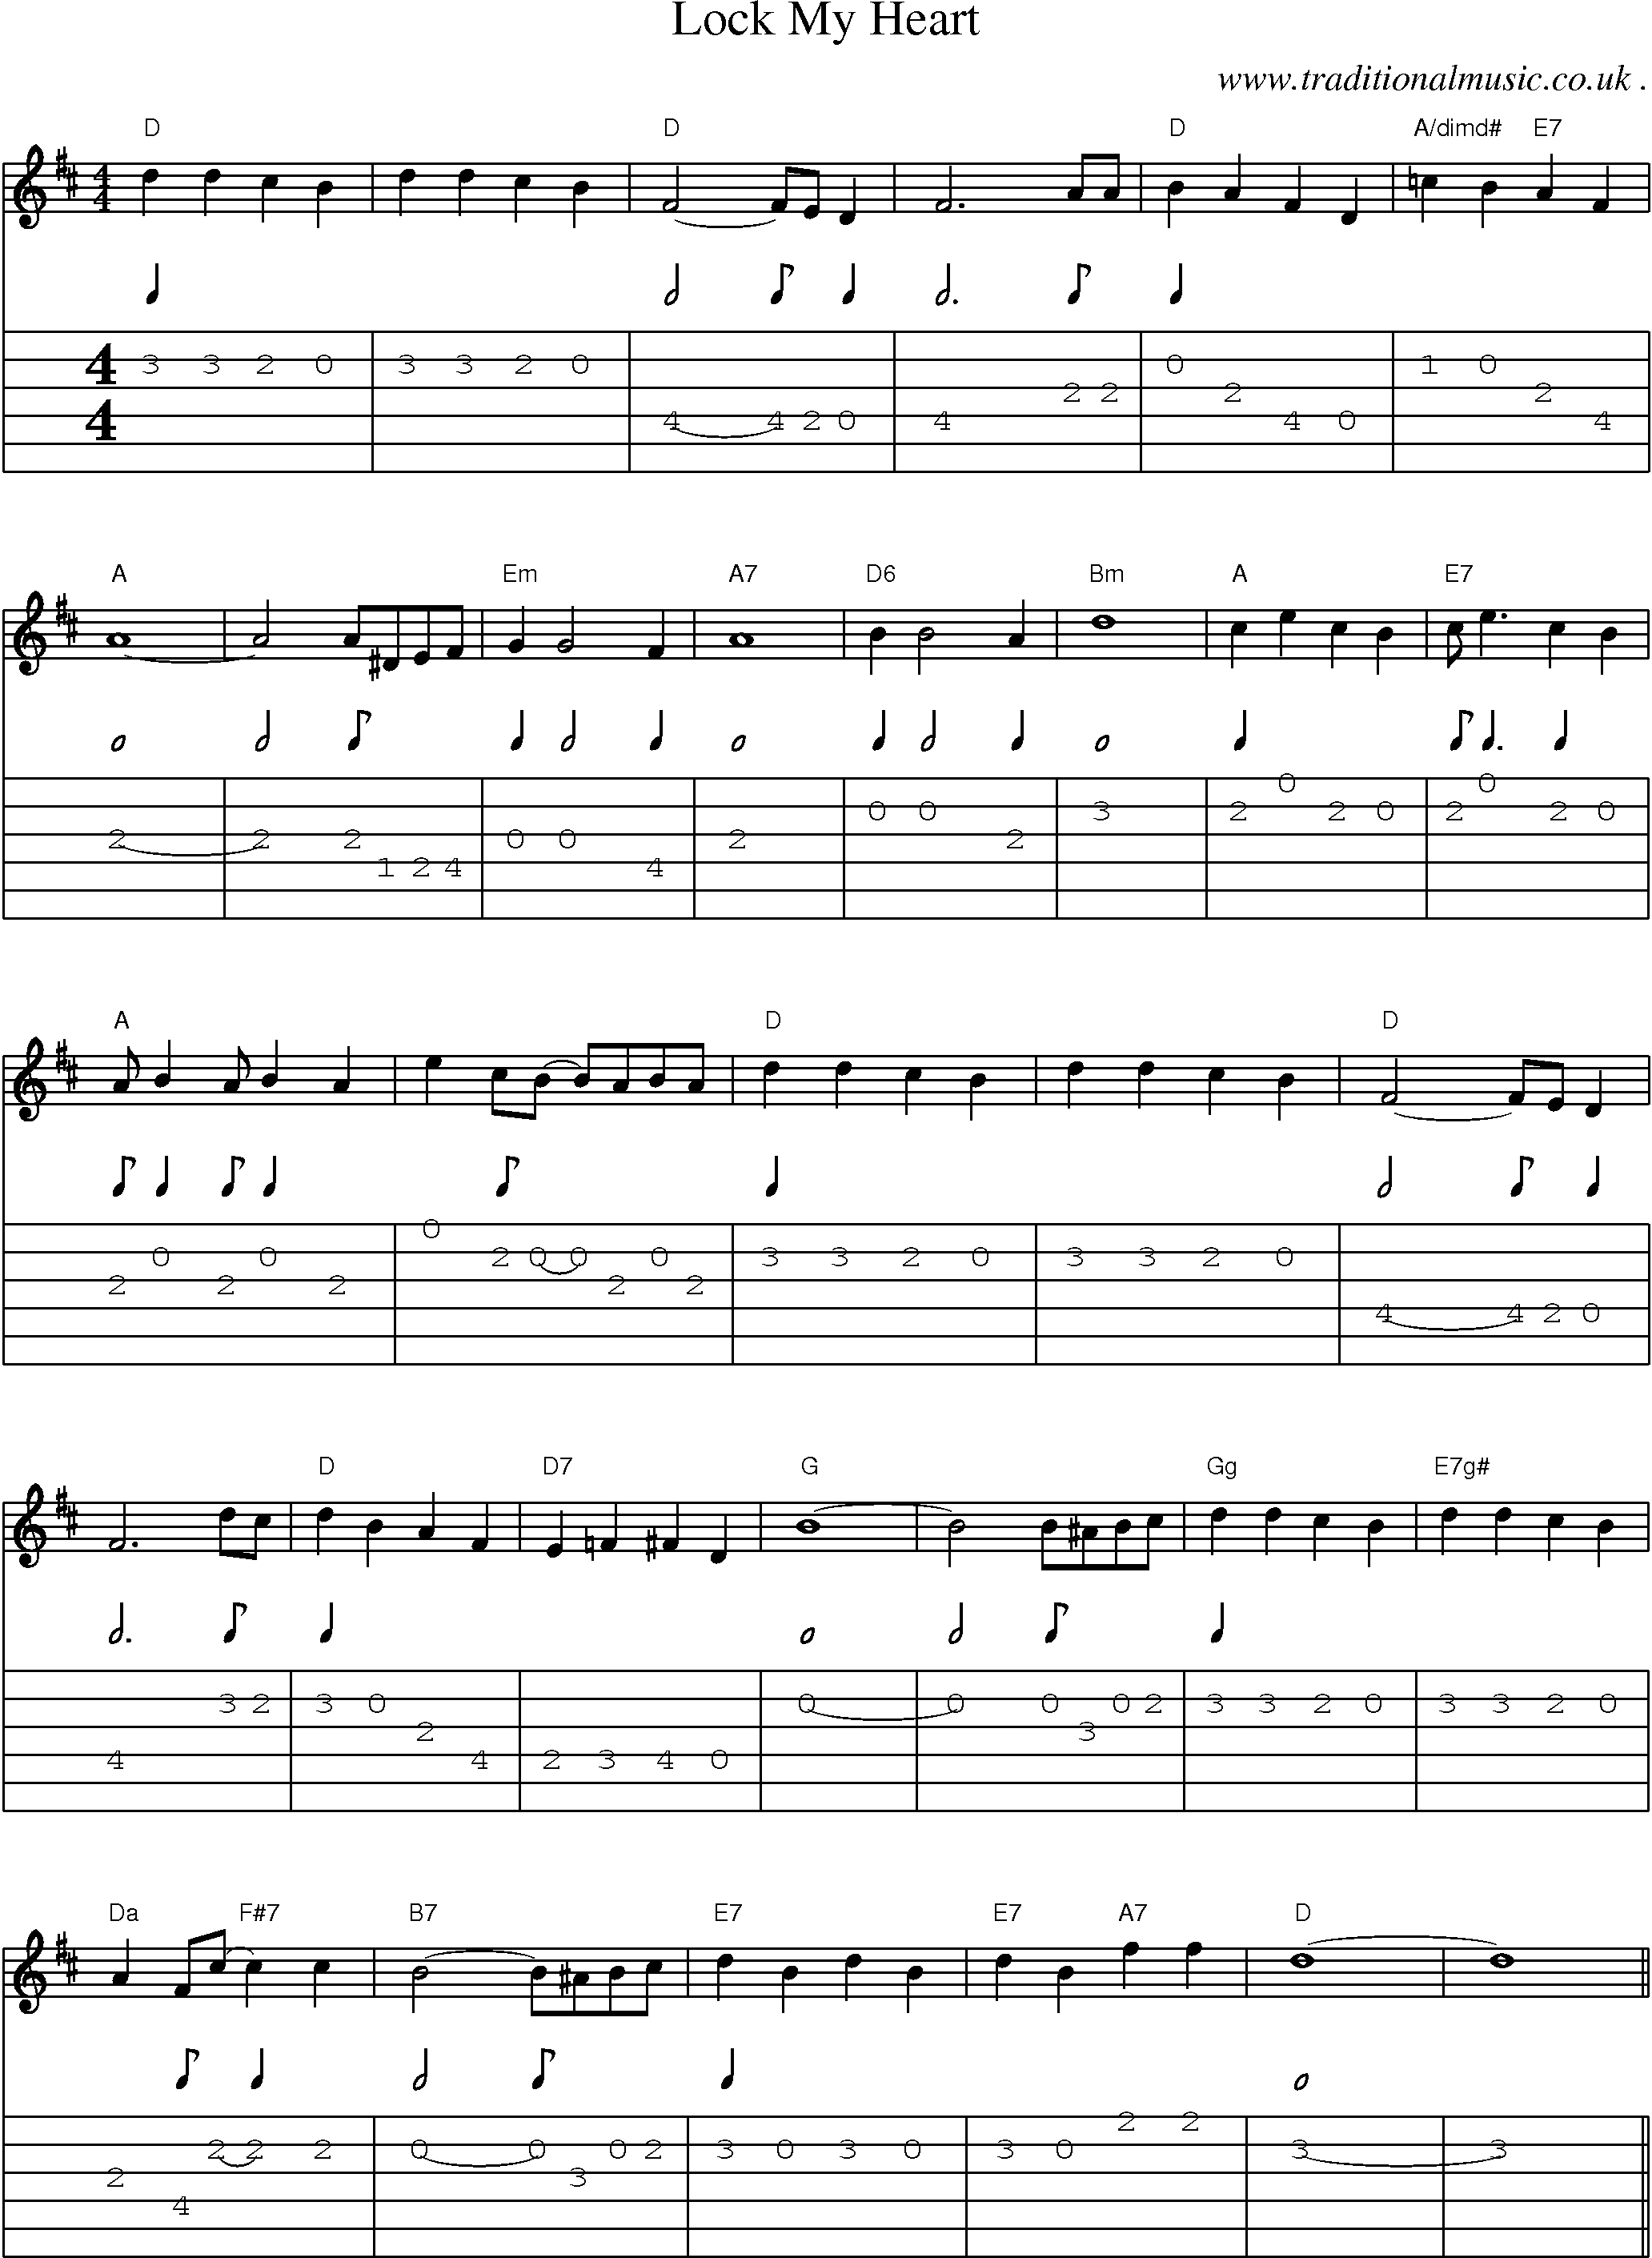 Sheet-Music and Guitar Tabs for Lock My Heart